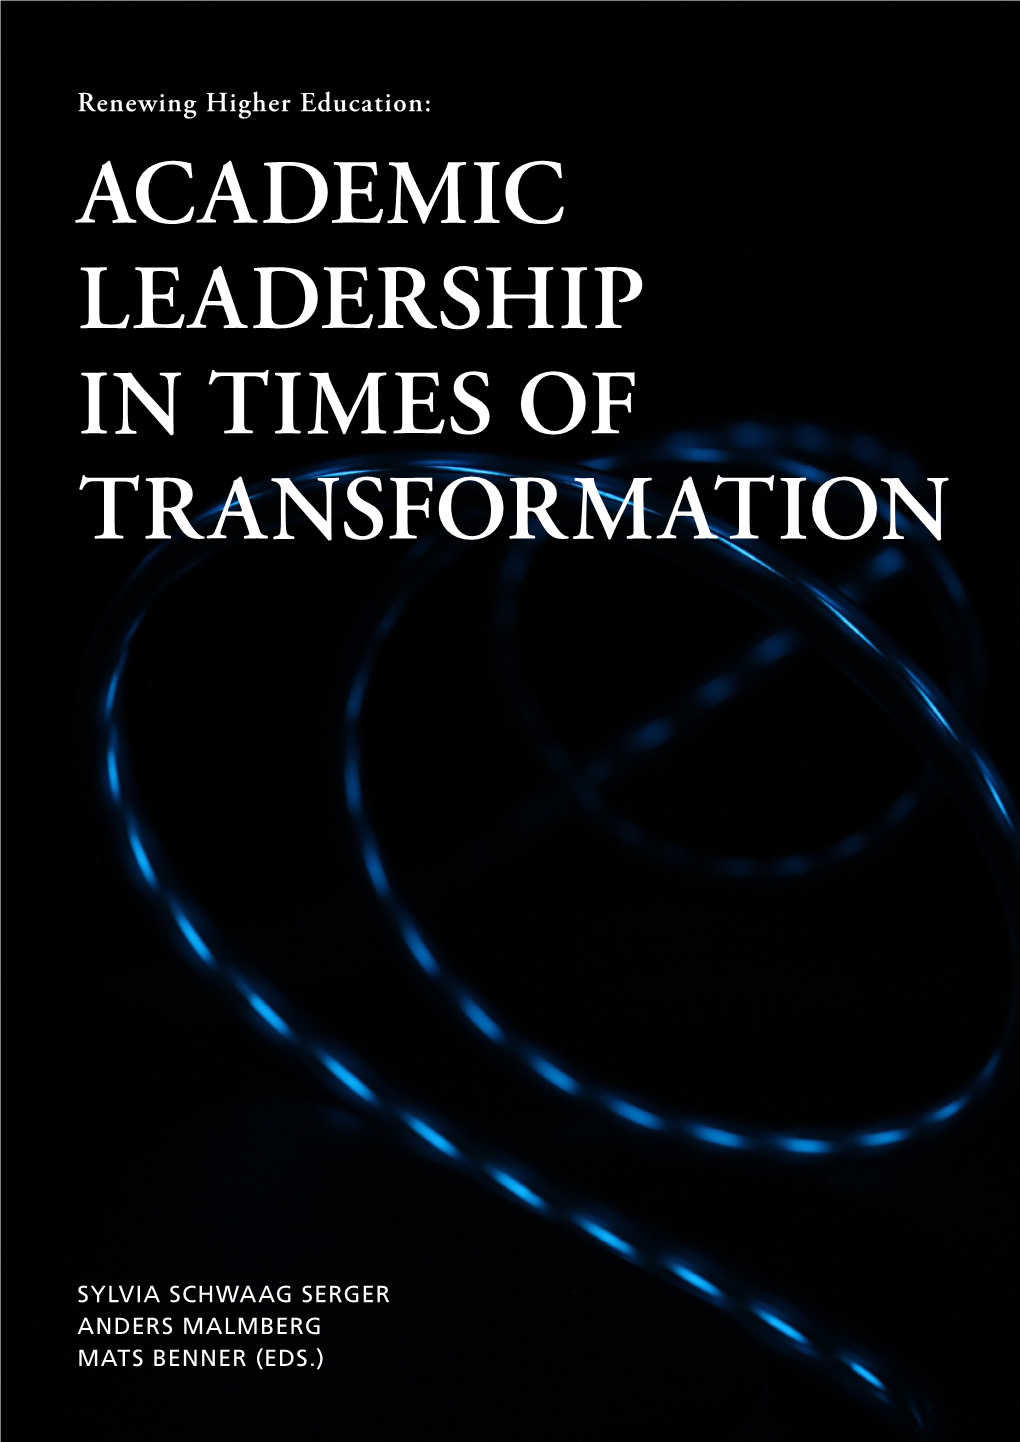 Renewal of Higher Education: Academic Leadership in Times of Transformation